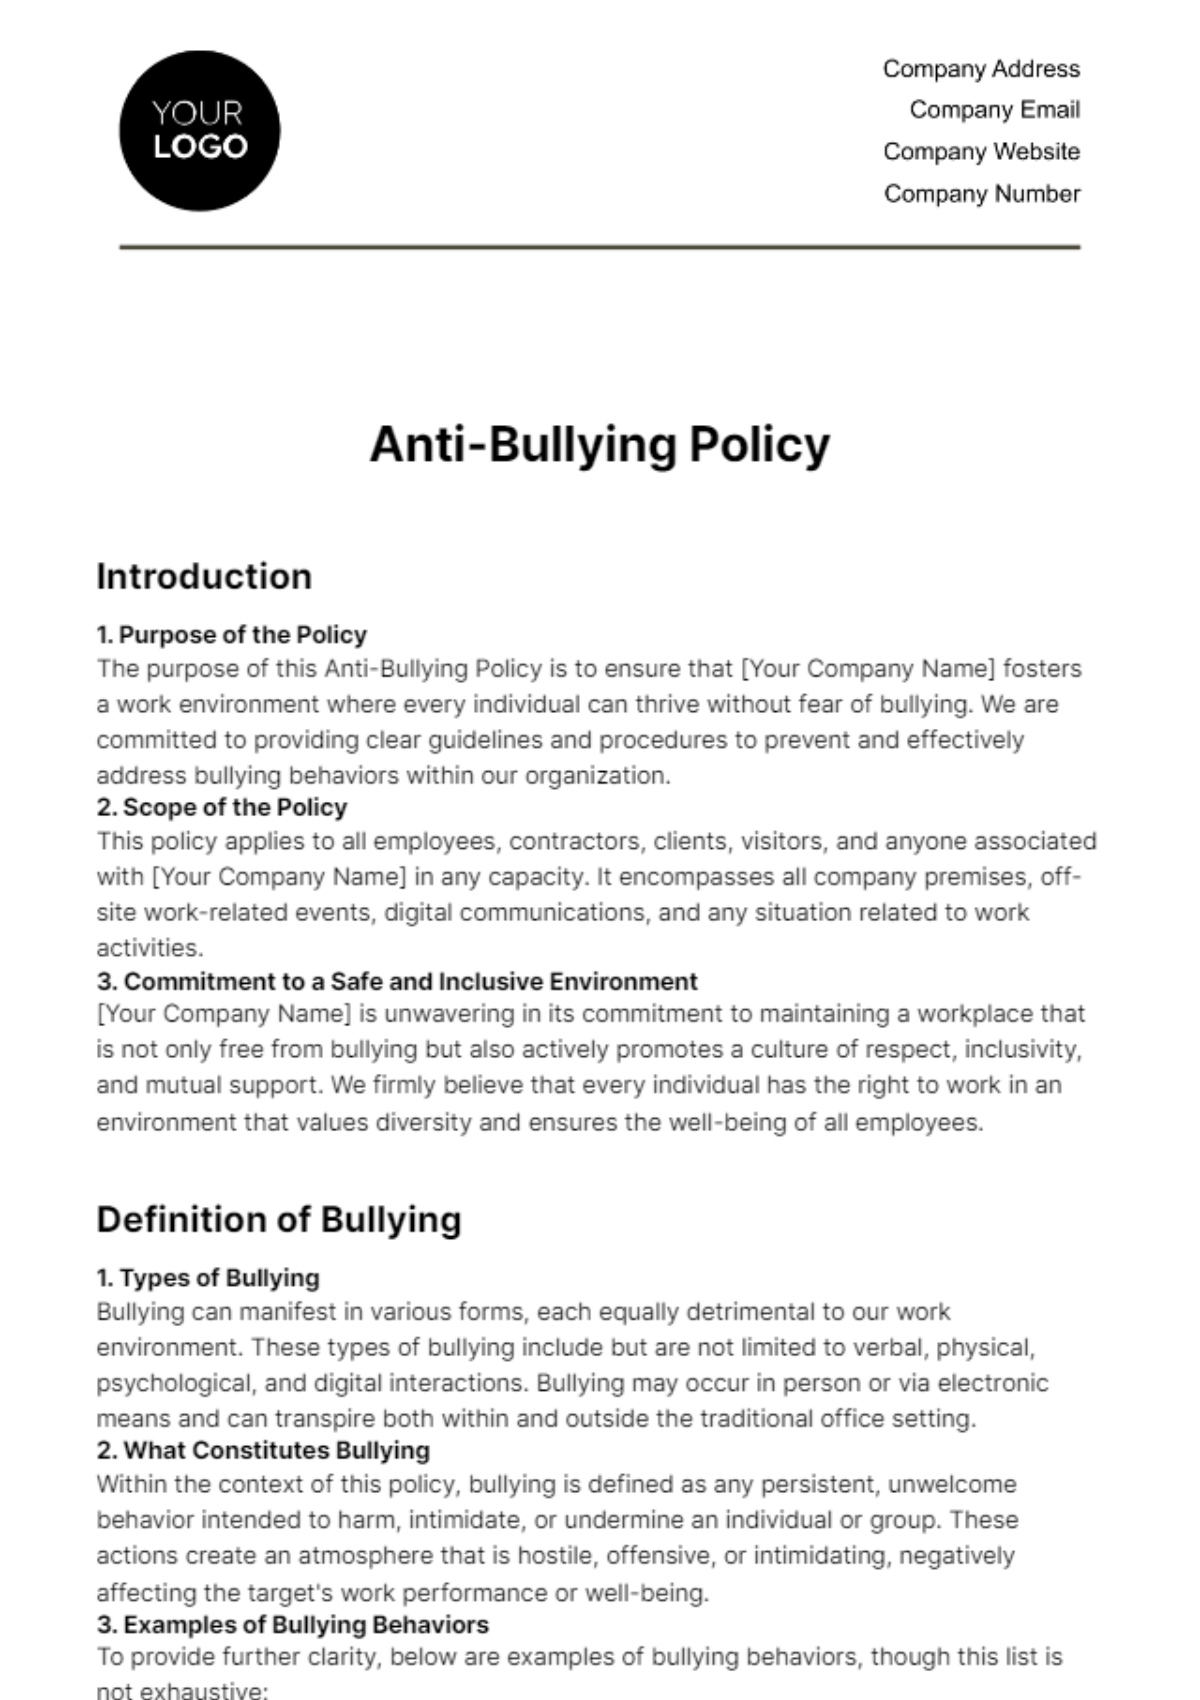 Anti-Bullying Policy HR Template